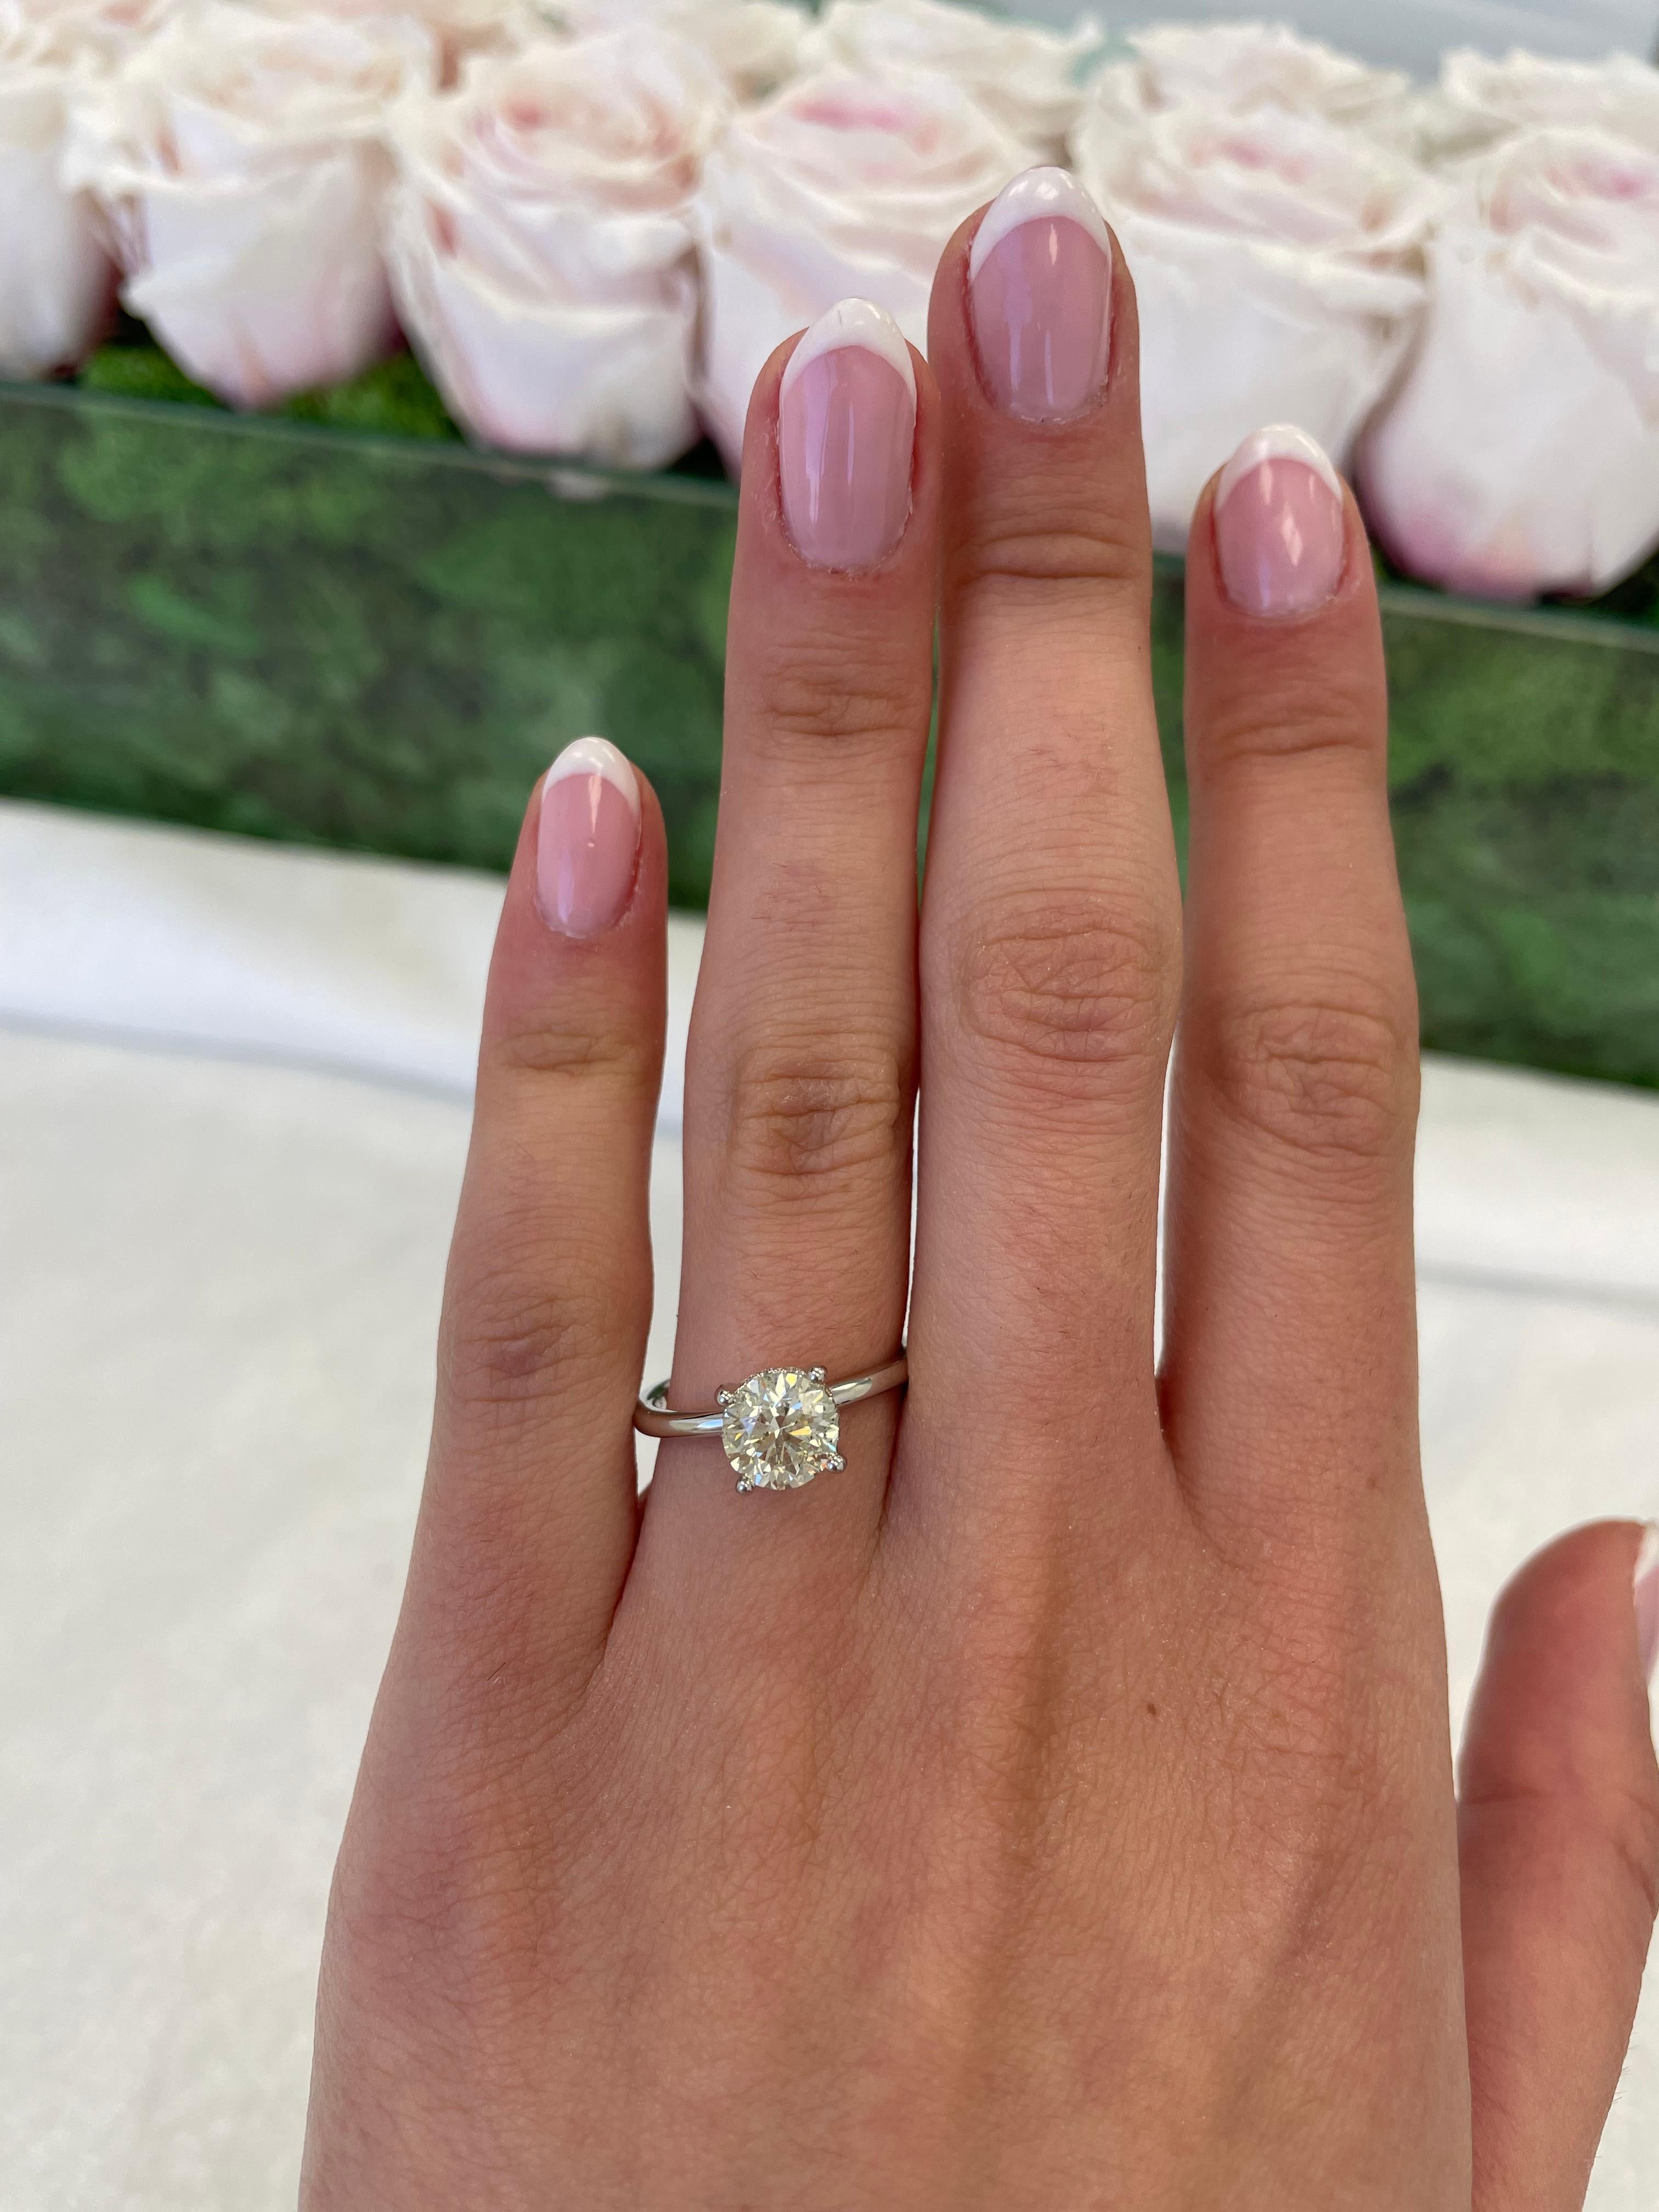 Classic solitaire diamond engagement ring with hidden halo.
1.60 carats total diamond weight.
1.47 carat round brilliant diamond, approximately J/K color grade and I1 clarity grade. Complimented by 0.13 carats of round brilliant diamonds,